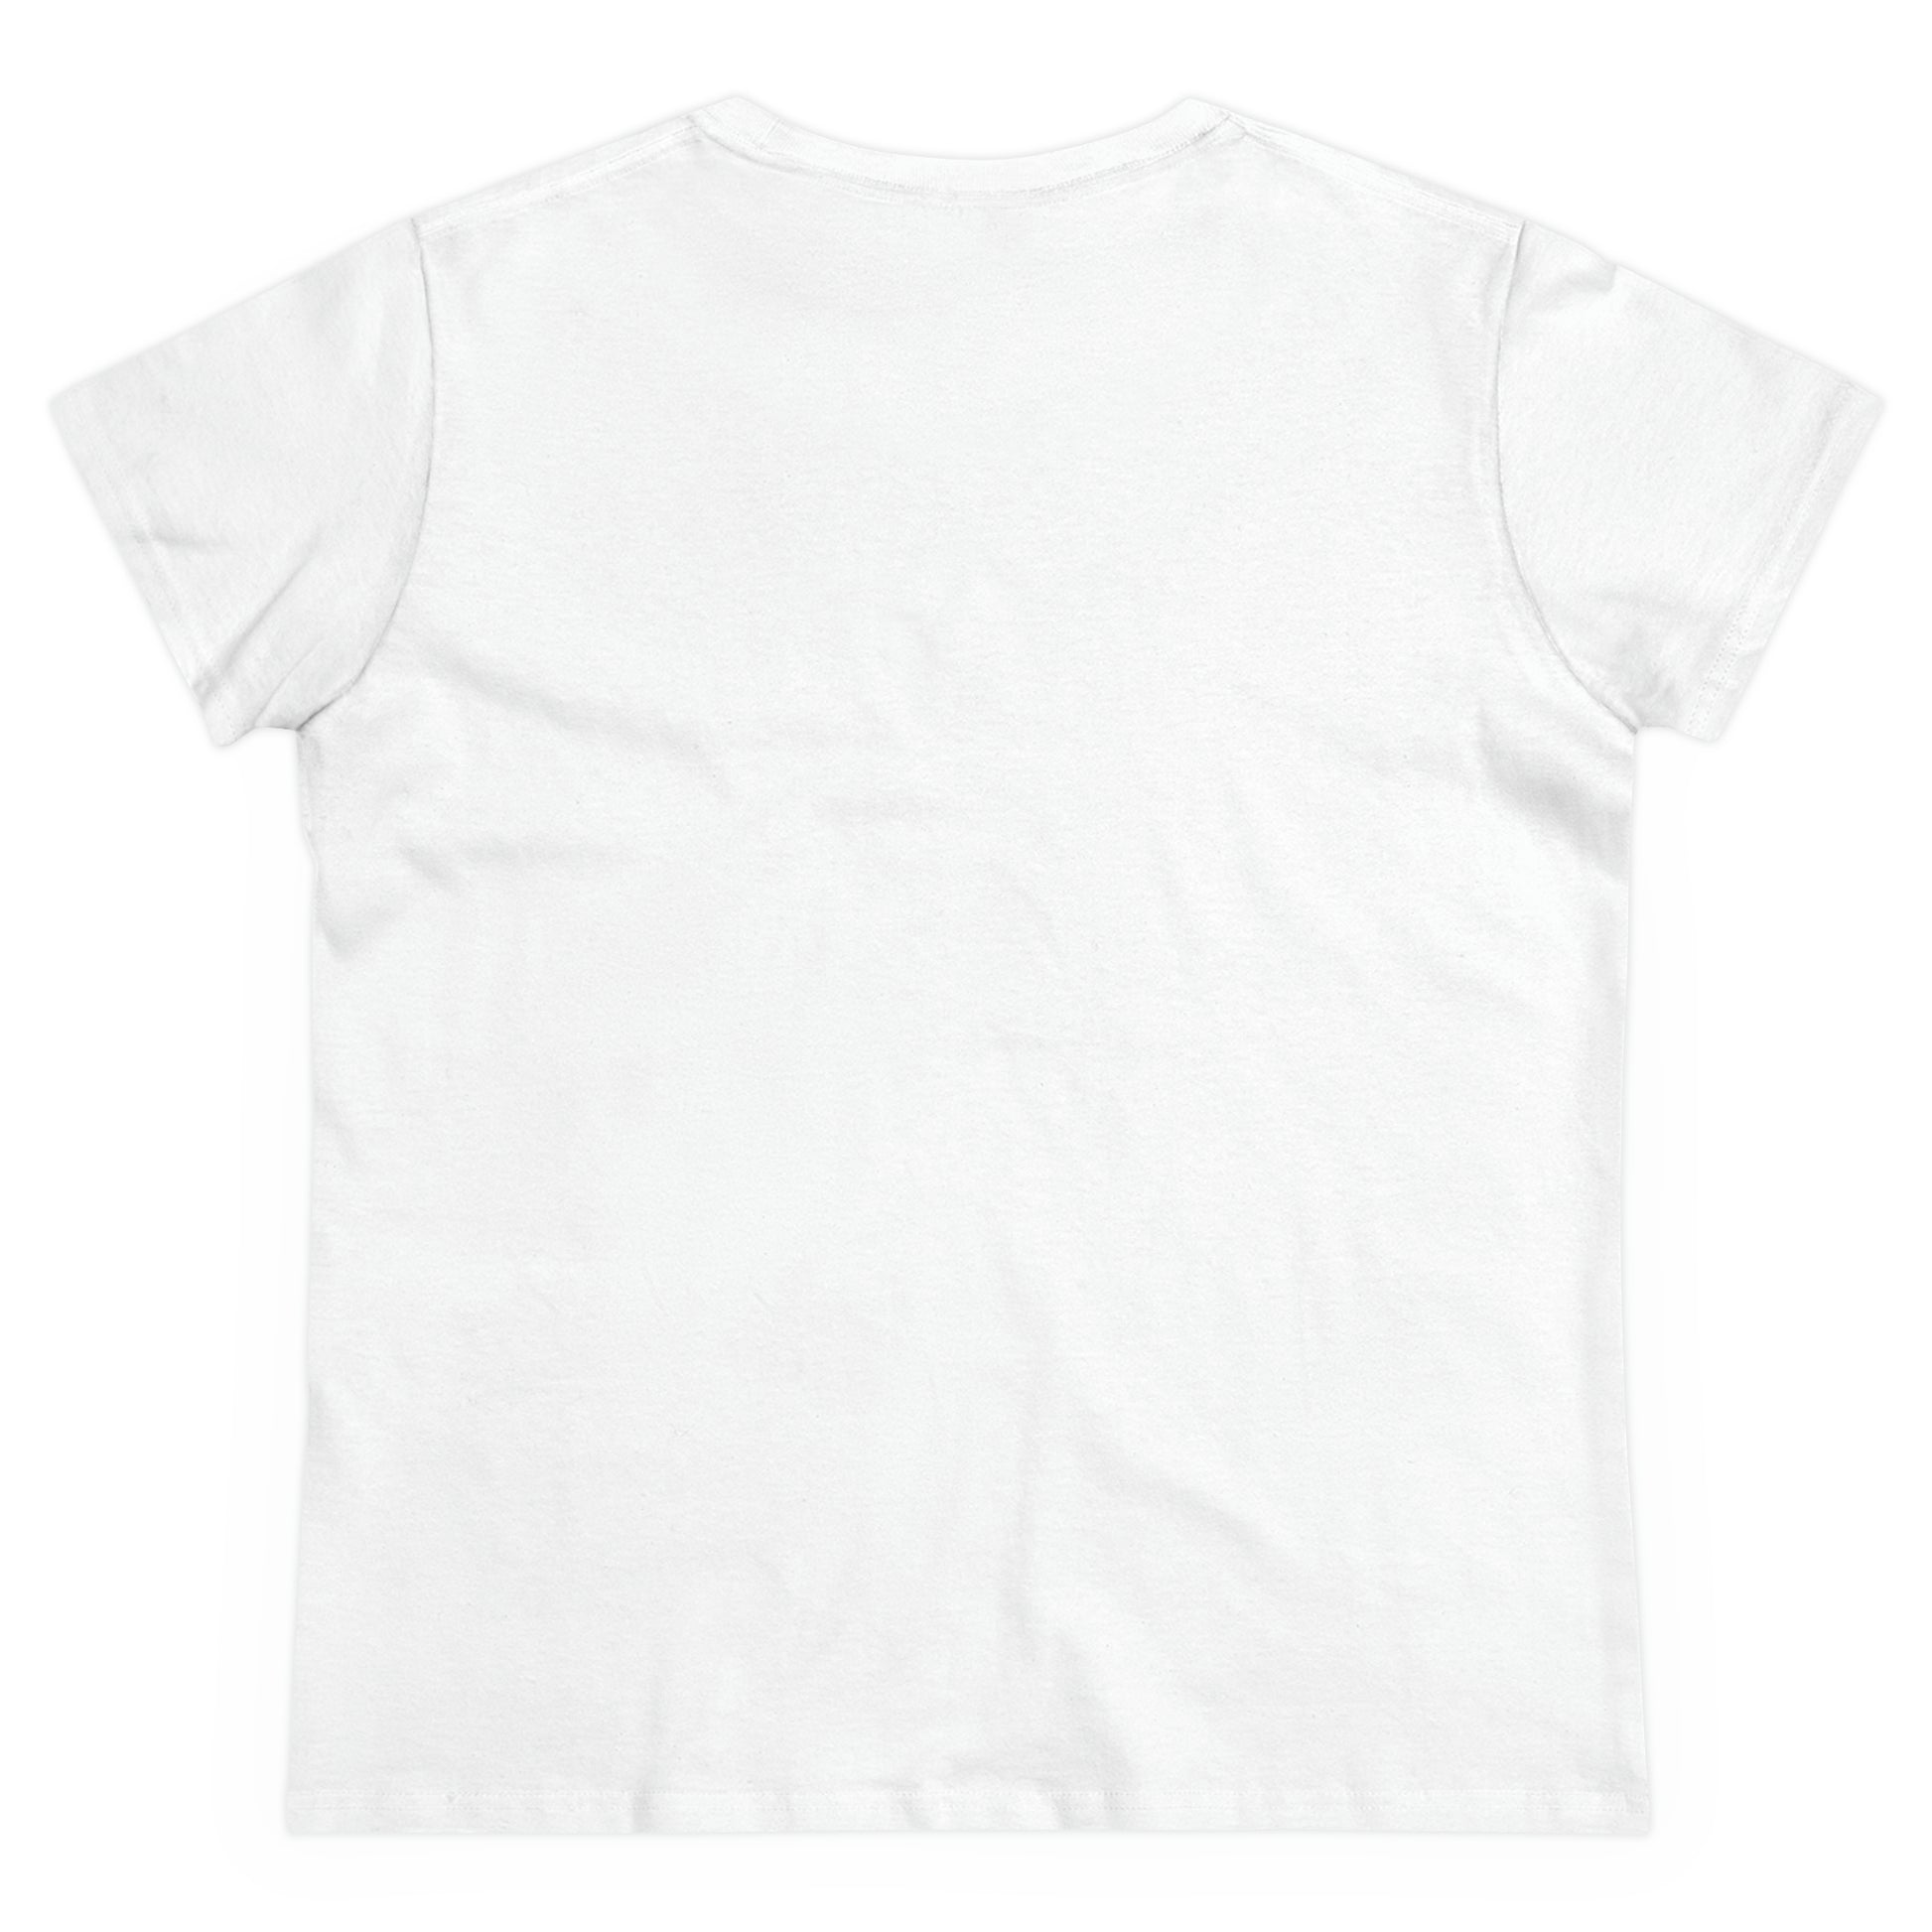 Flat back view of the white shirt